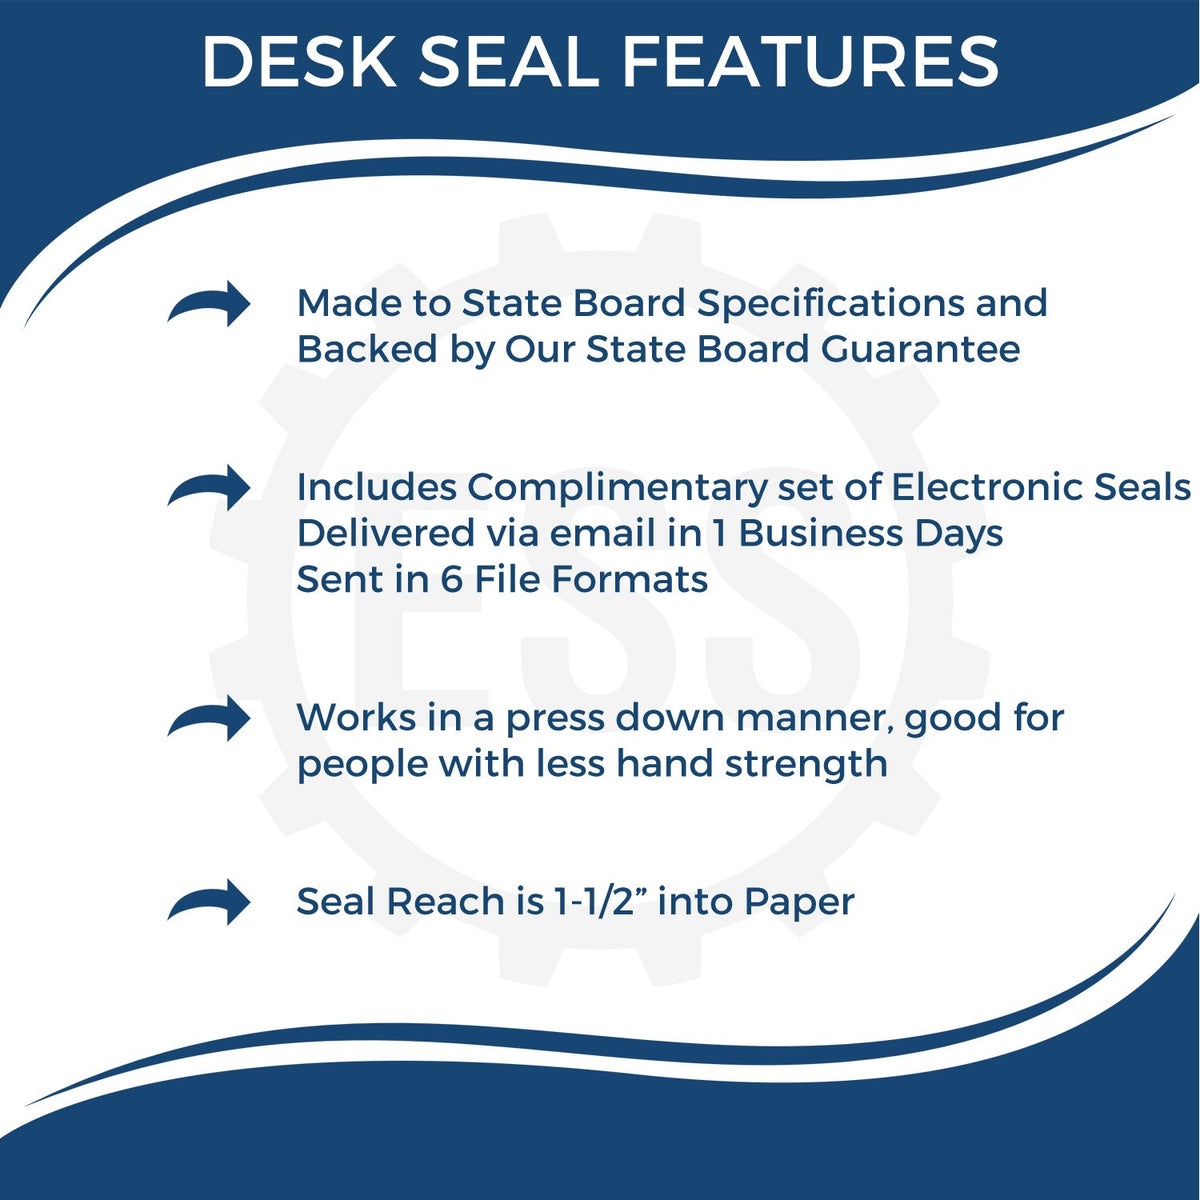 District of Columbia Geologist Desk Seal